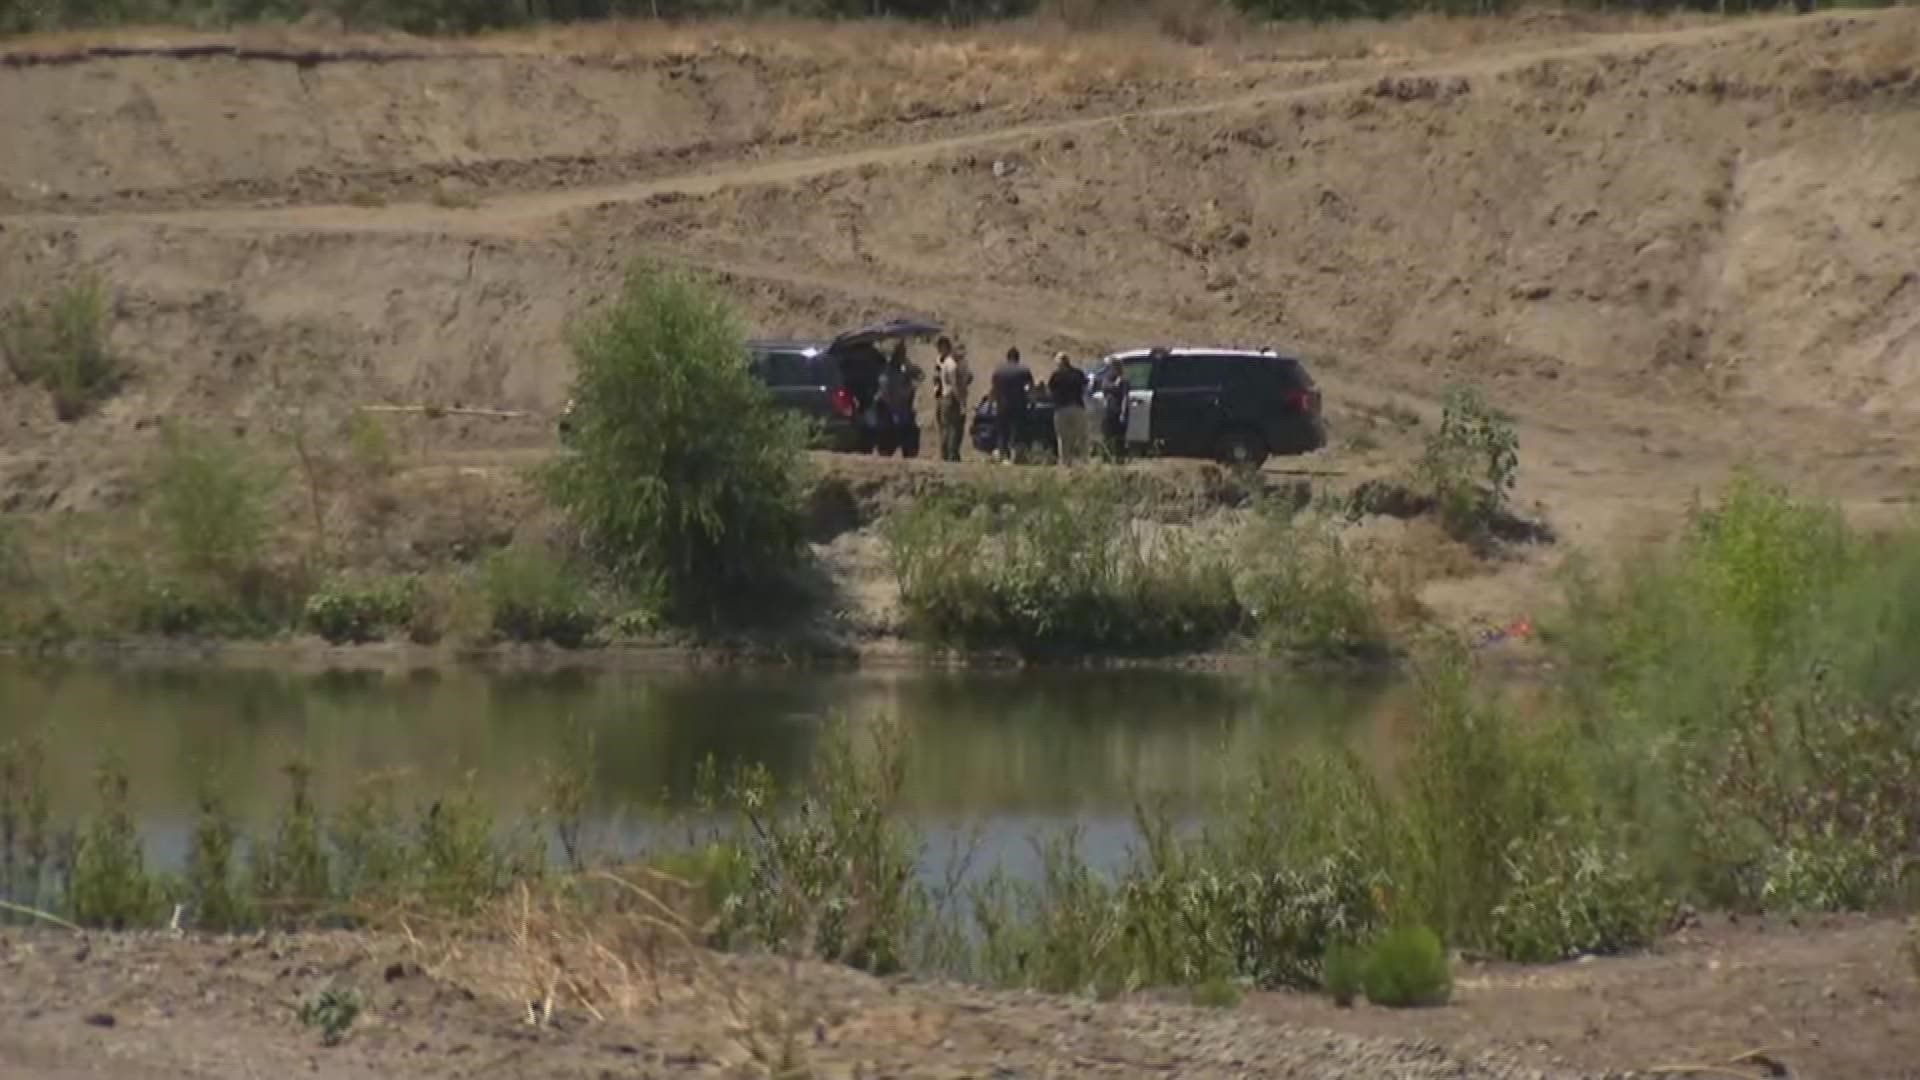 A body was found in a pond Monday just after 4 a.m. near Willow Rd. and State Route 67. Sheriff's deputies have not provided any details as to the victim's identity.